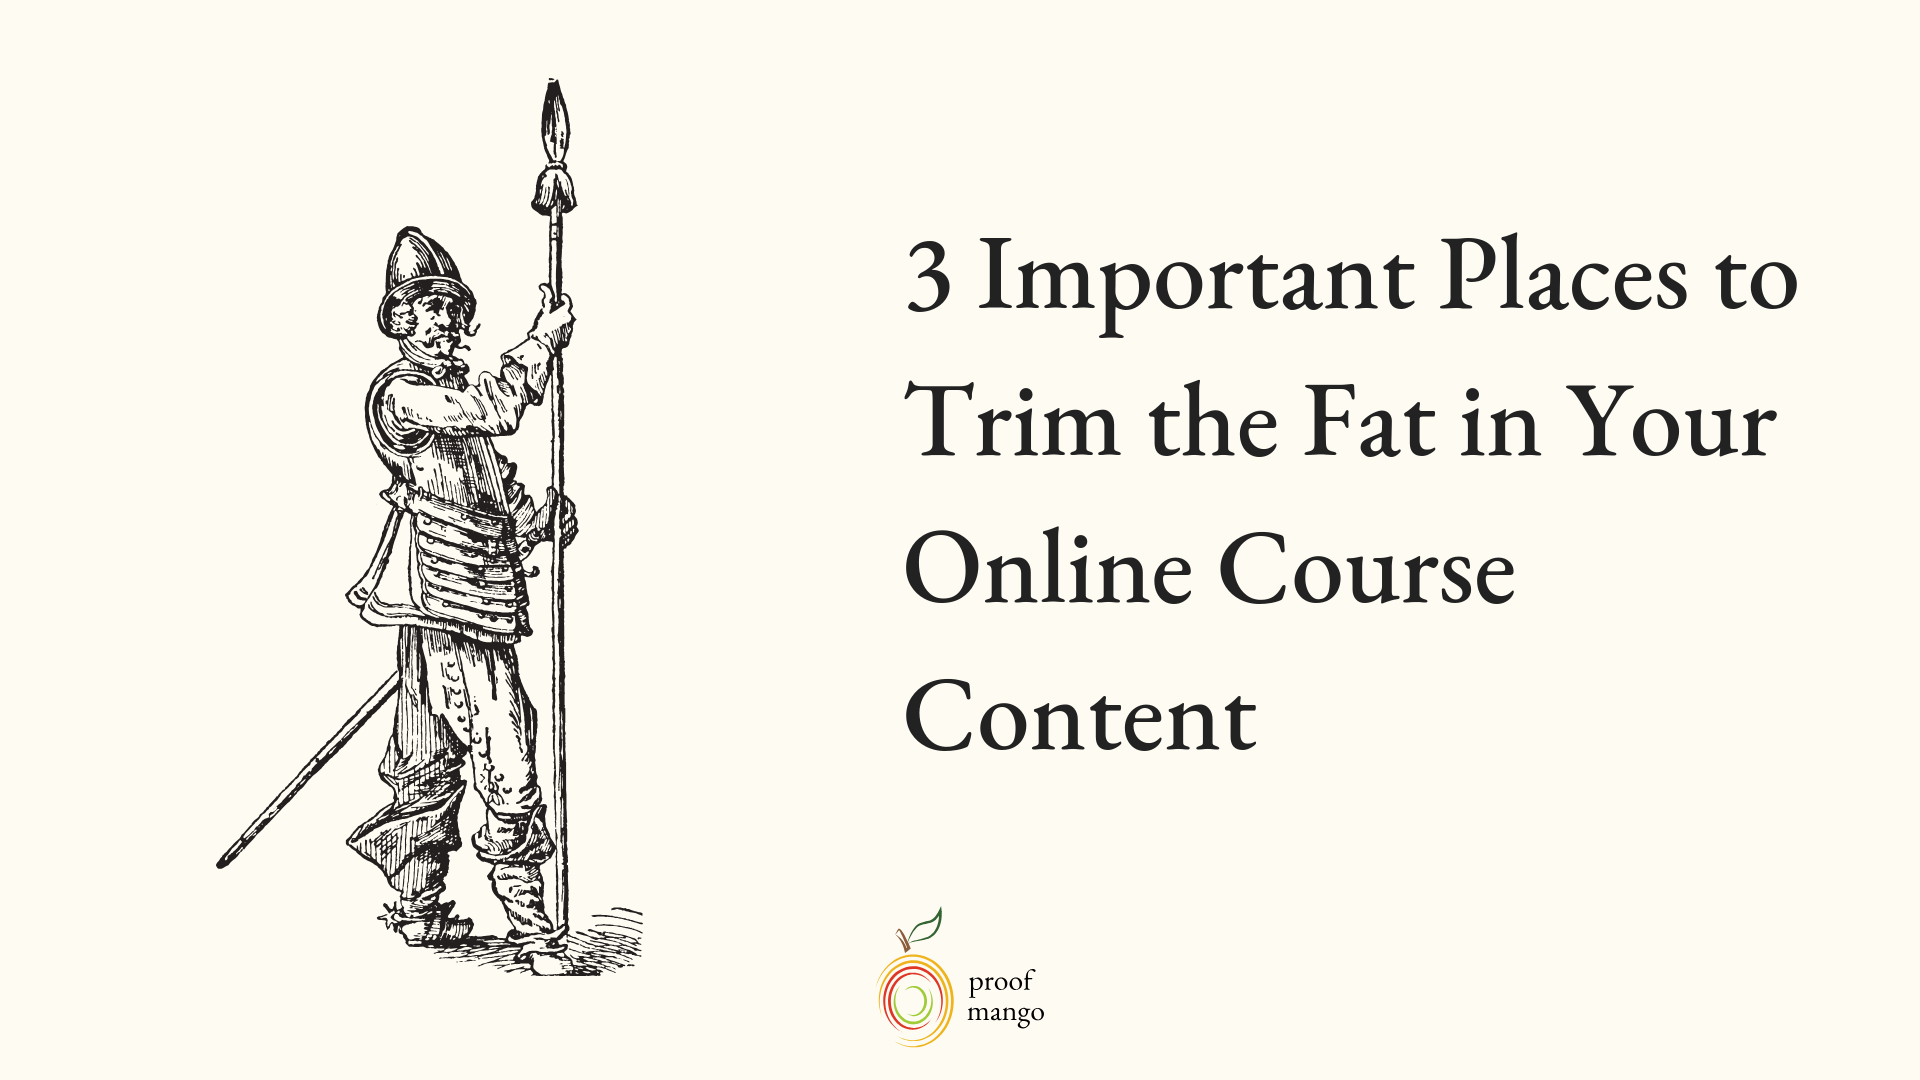 3-Important-Places-to-Trim-the-Fat-in-Your-Online-Course-Content